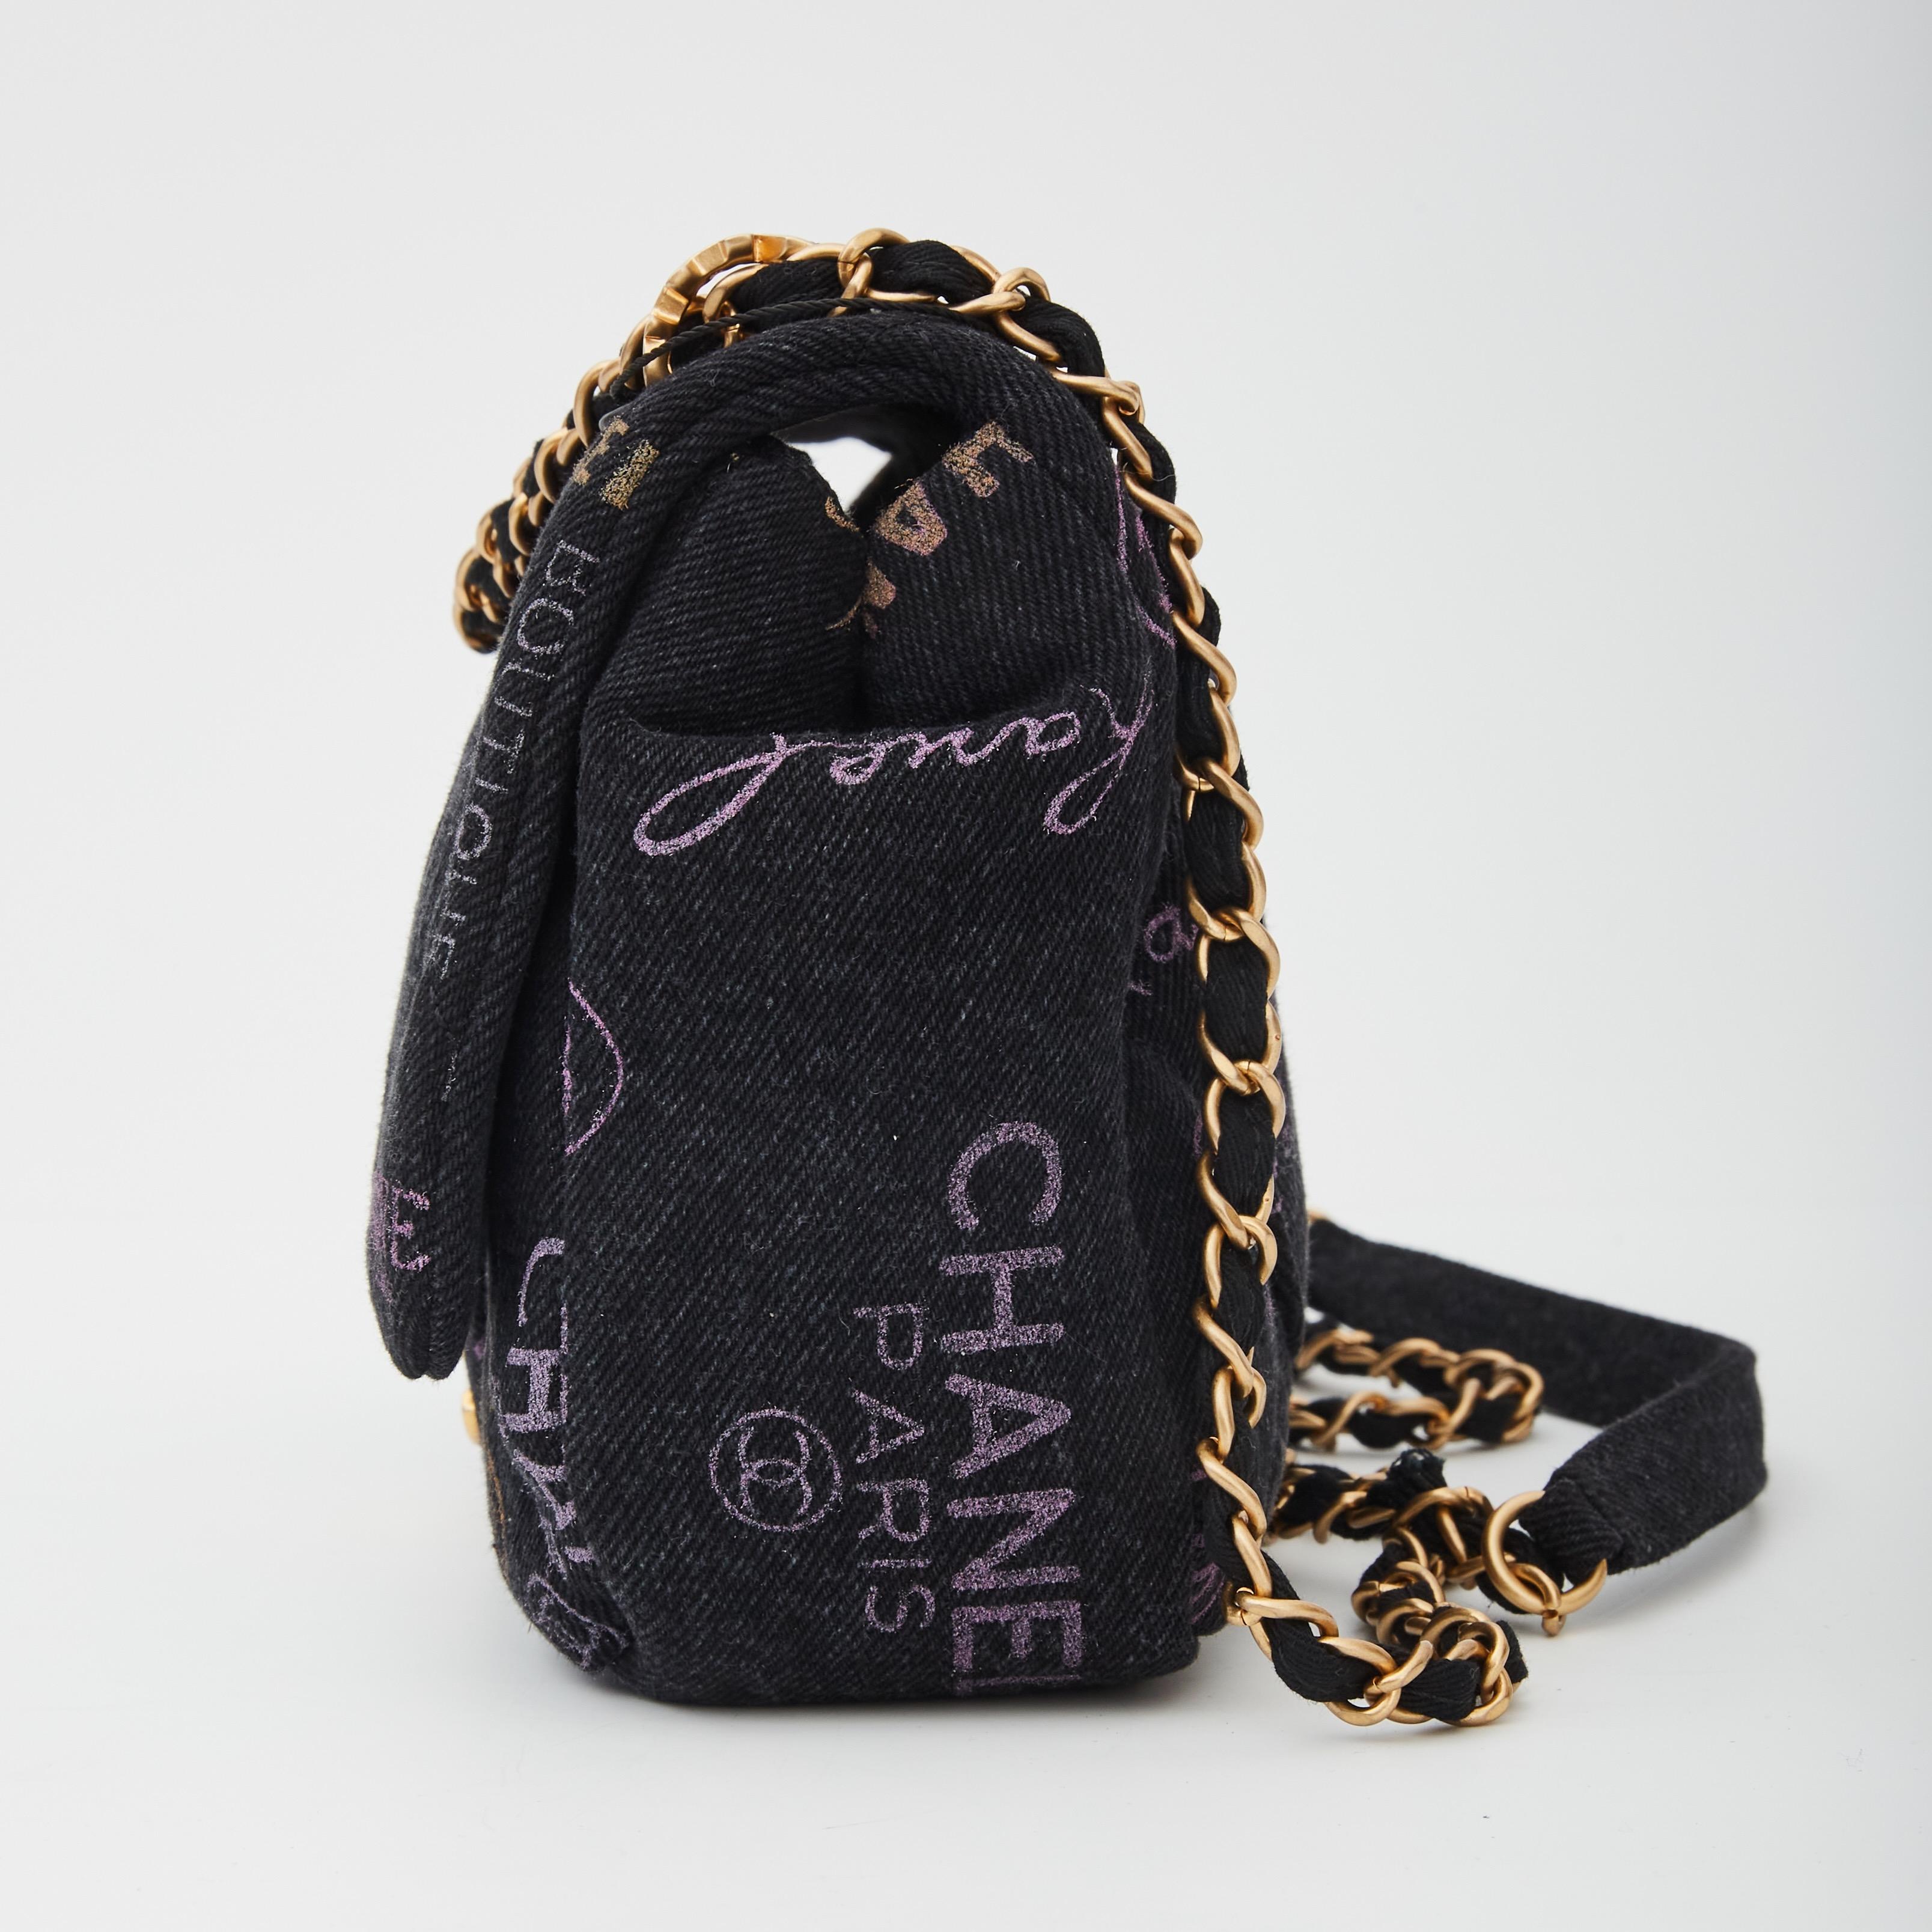 This flap bag is made from black denim. The bag features a crossbody canvas threaded aged gold chain shoulder strap. It also features a graffiti CC motif, and an aged gold Chanel CC turn lock that opens the flap to a matching fabric interior with a